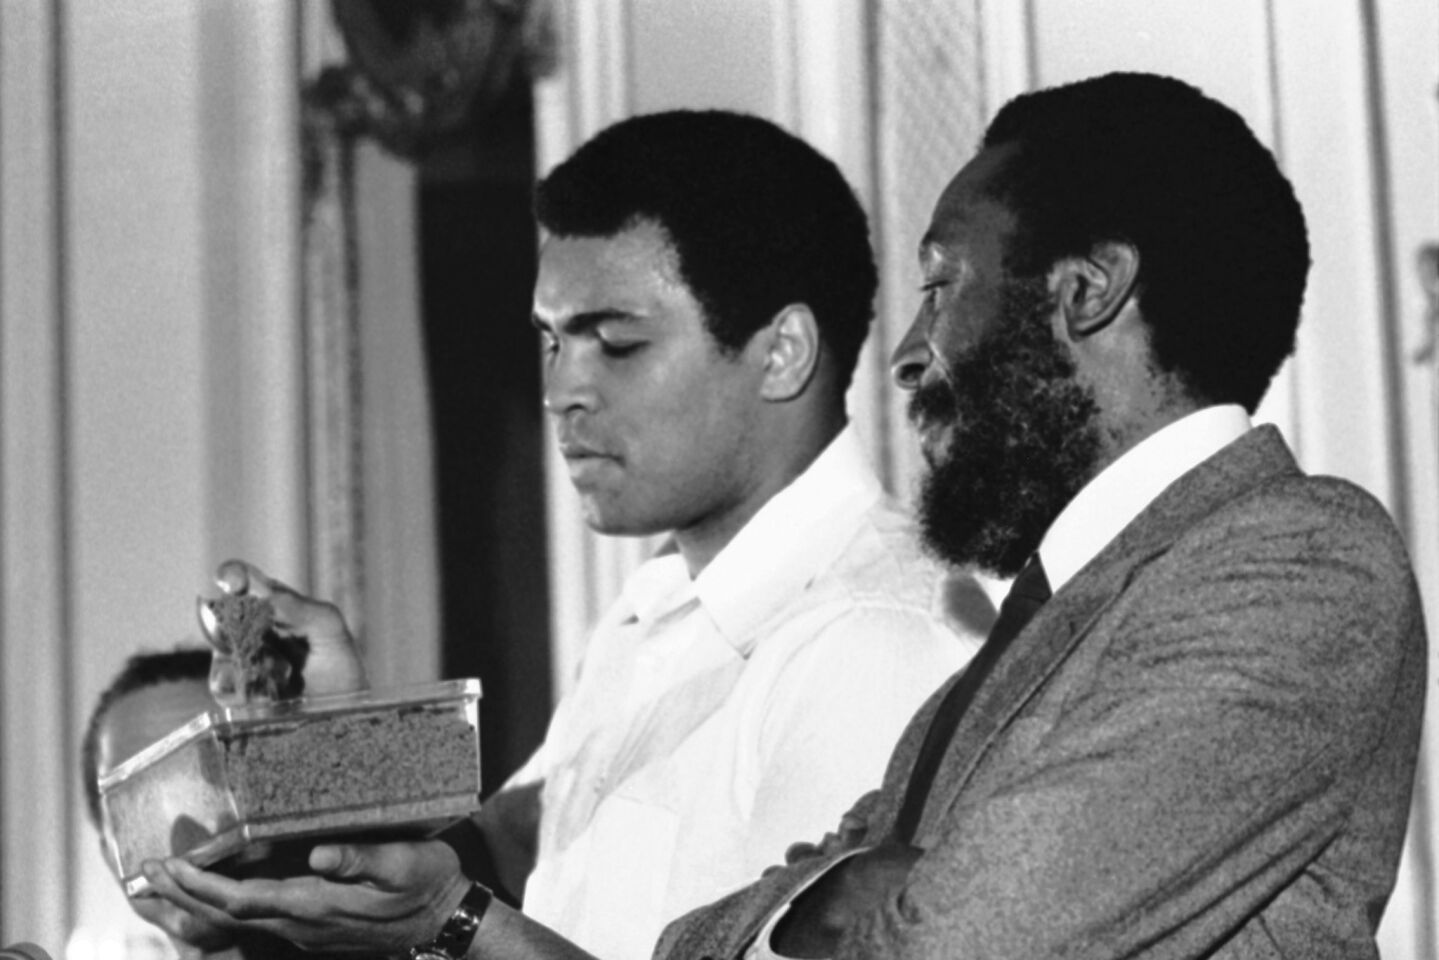 Boxing Champion Muhammad Ali spoons through a dish of health food he was promoting for Dick Gregory, right, at a Chicago press conference in1978.